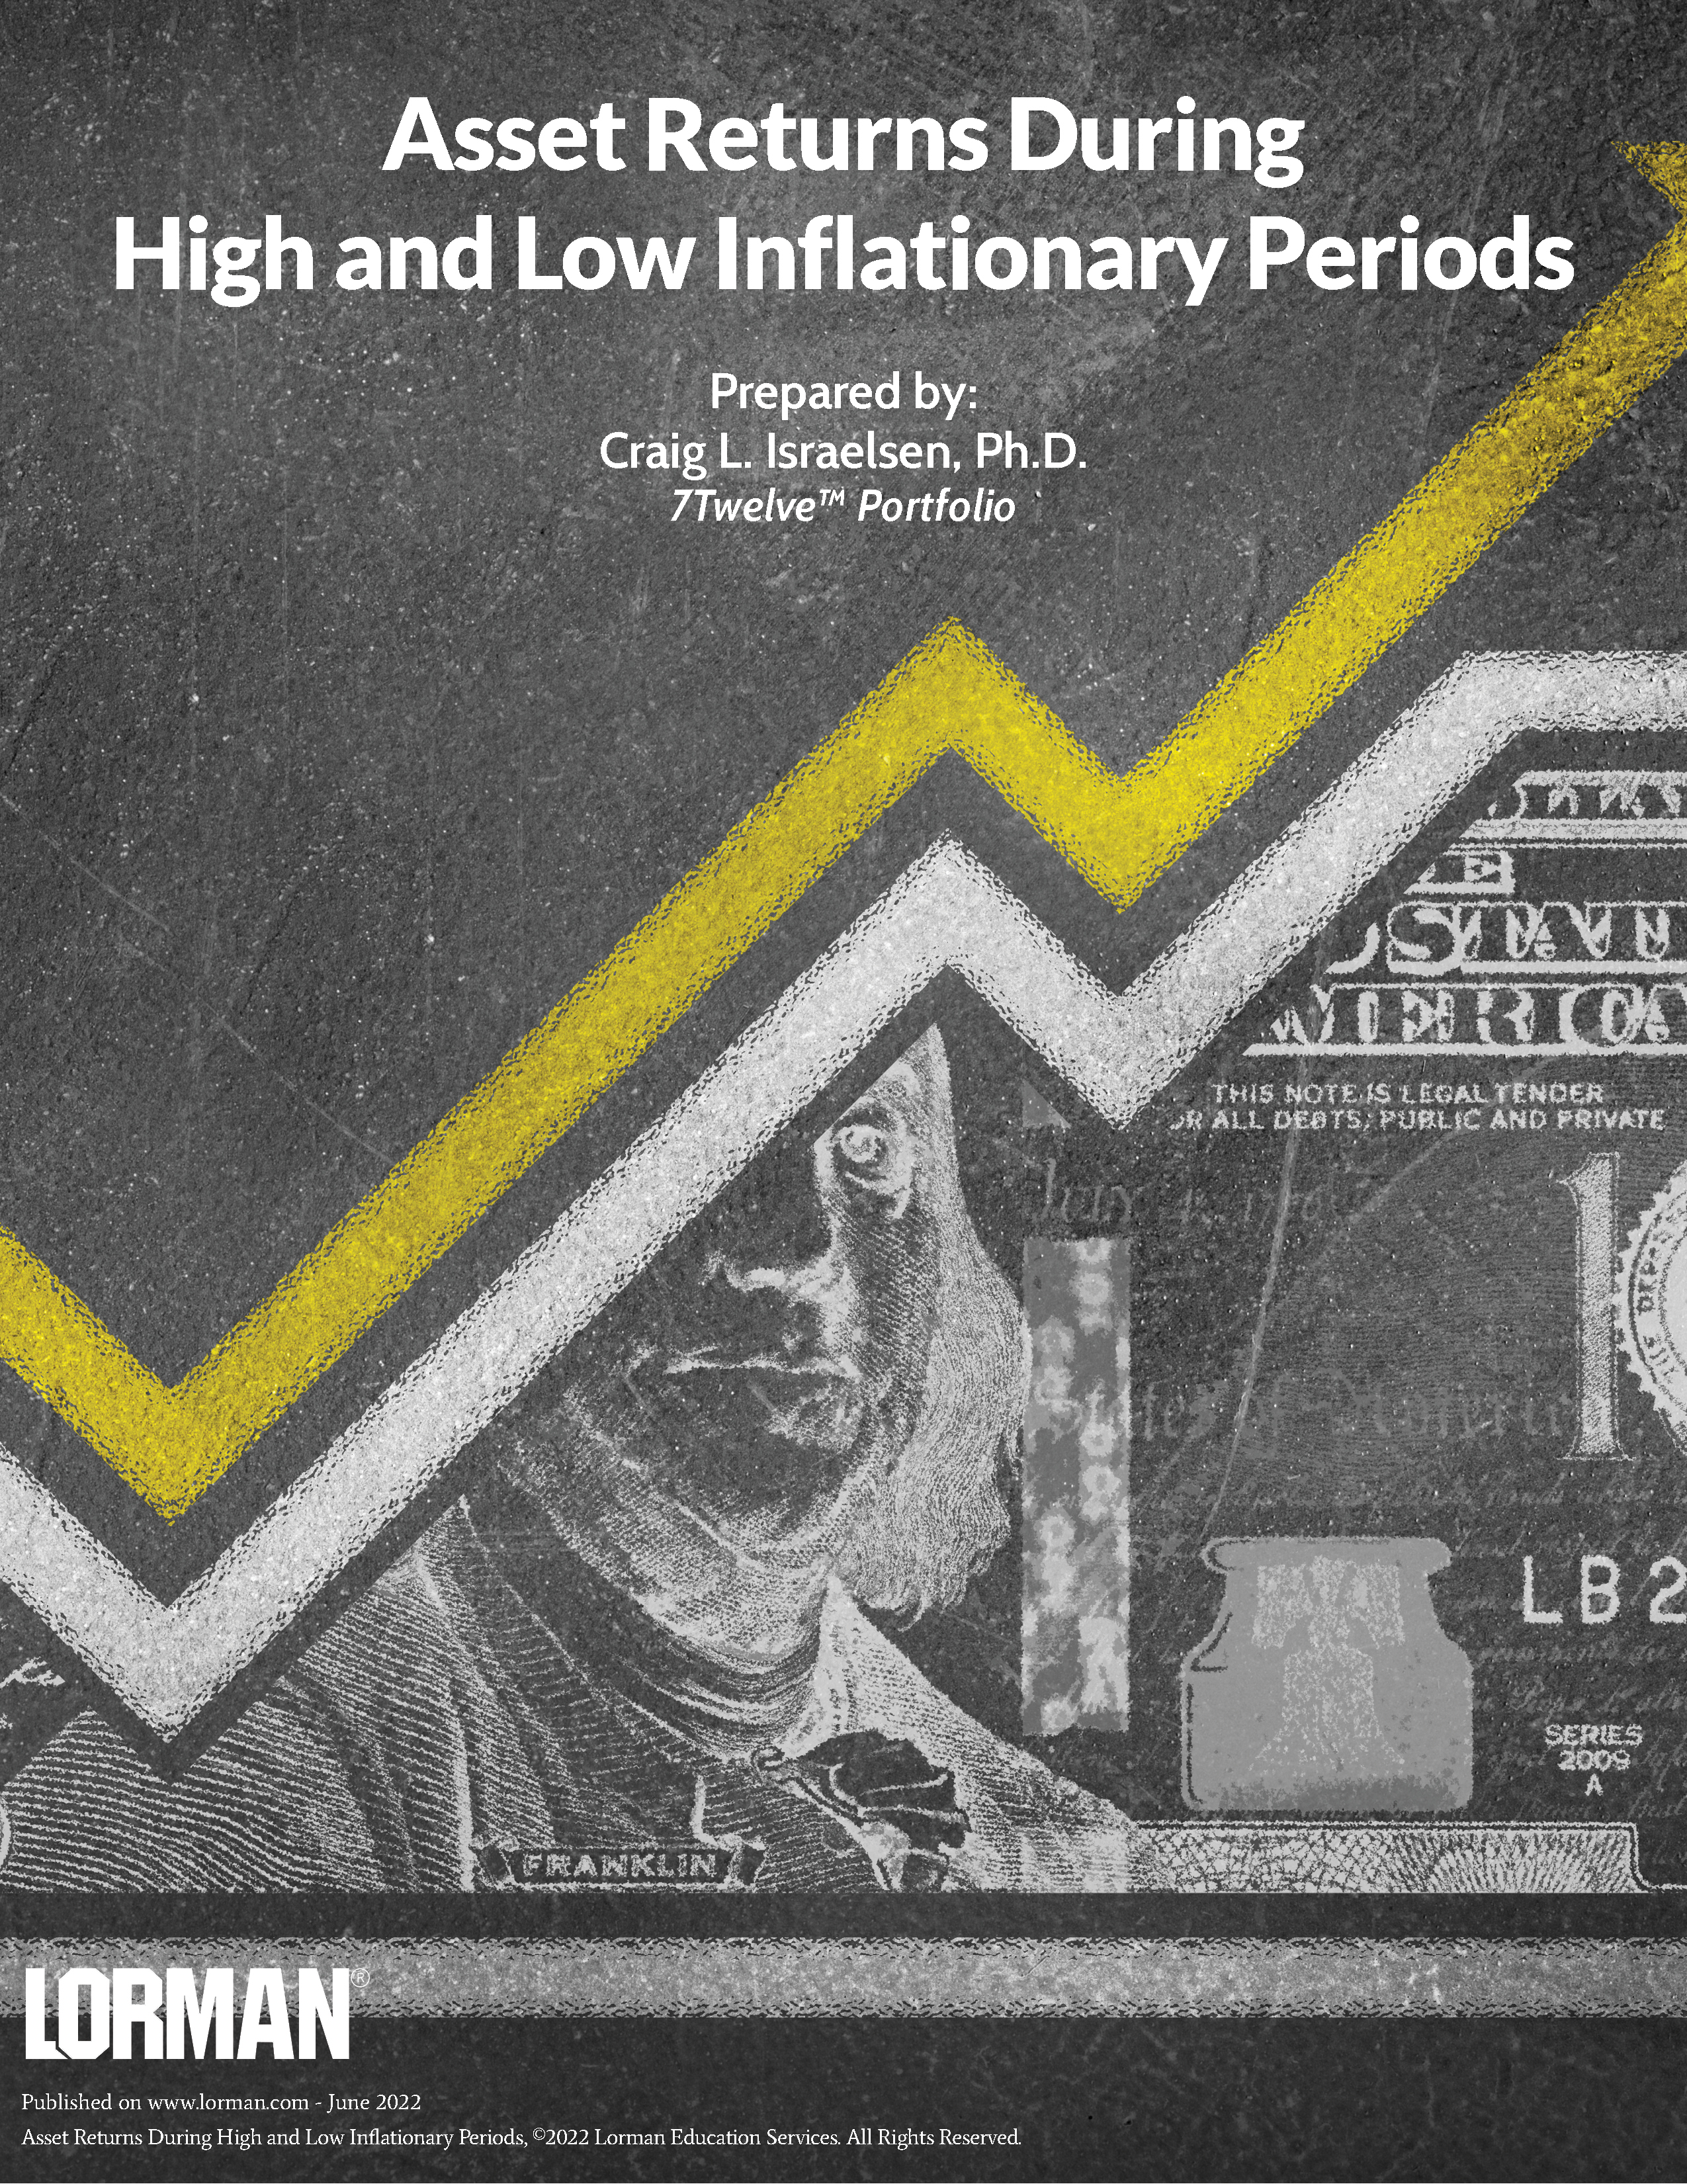 Asset Returns During High and Low Inflationary Periods